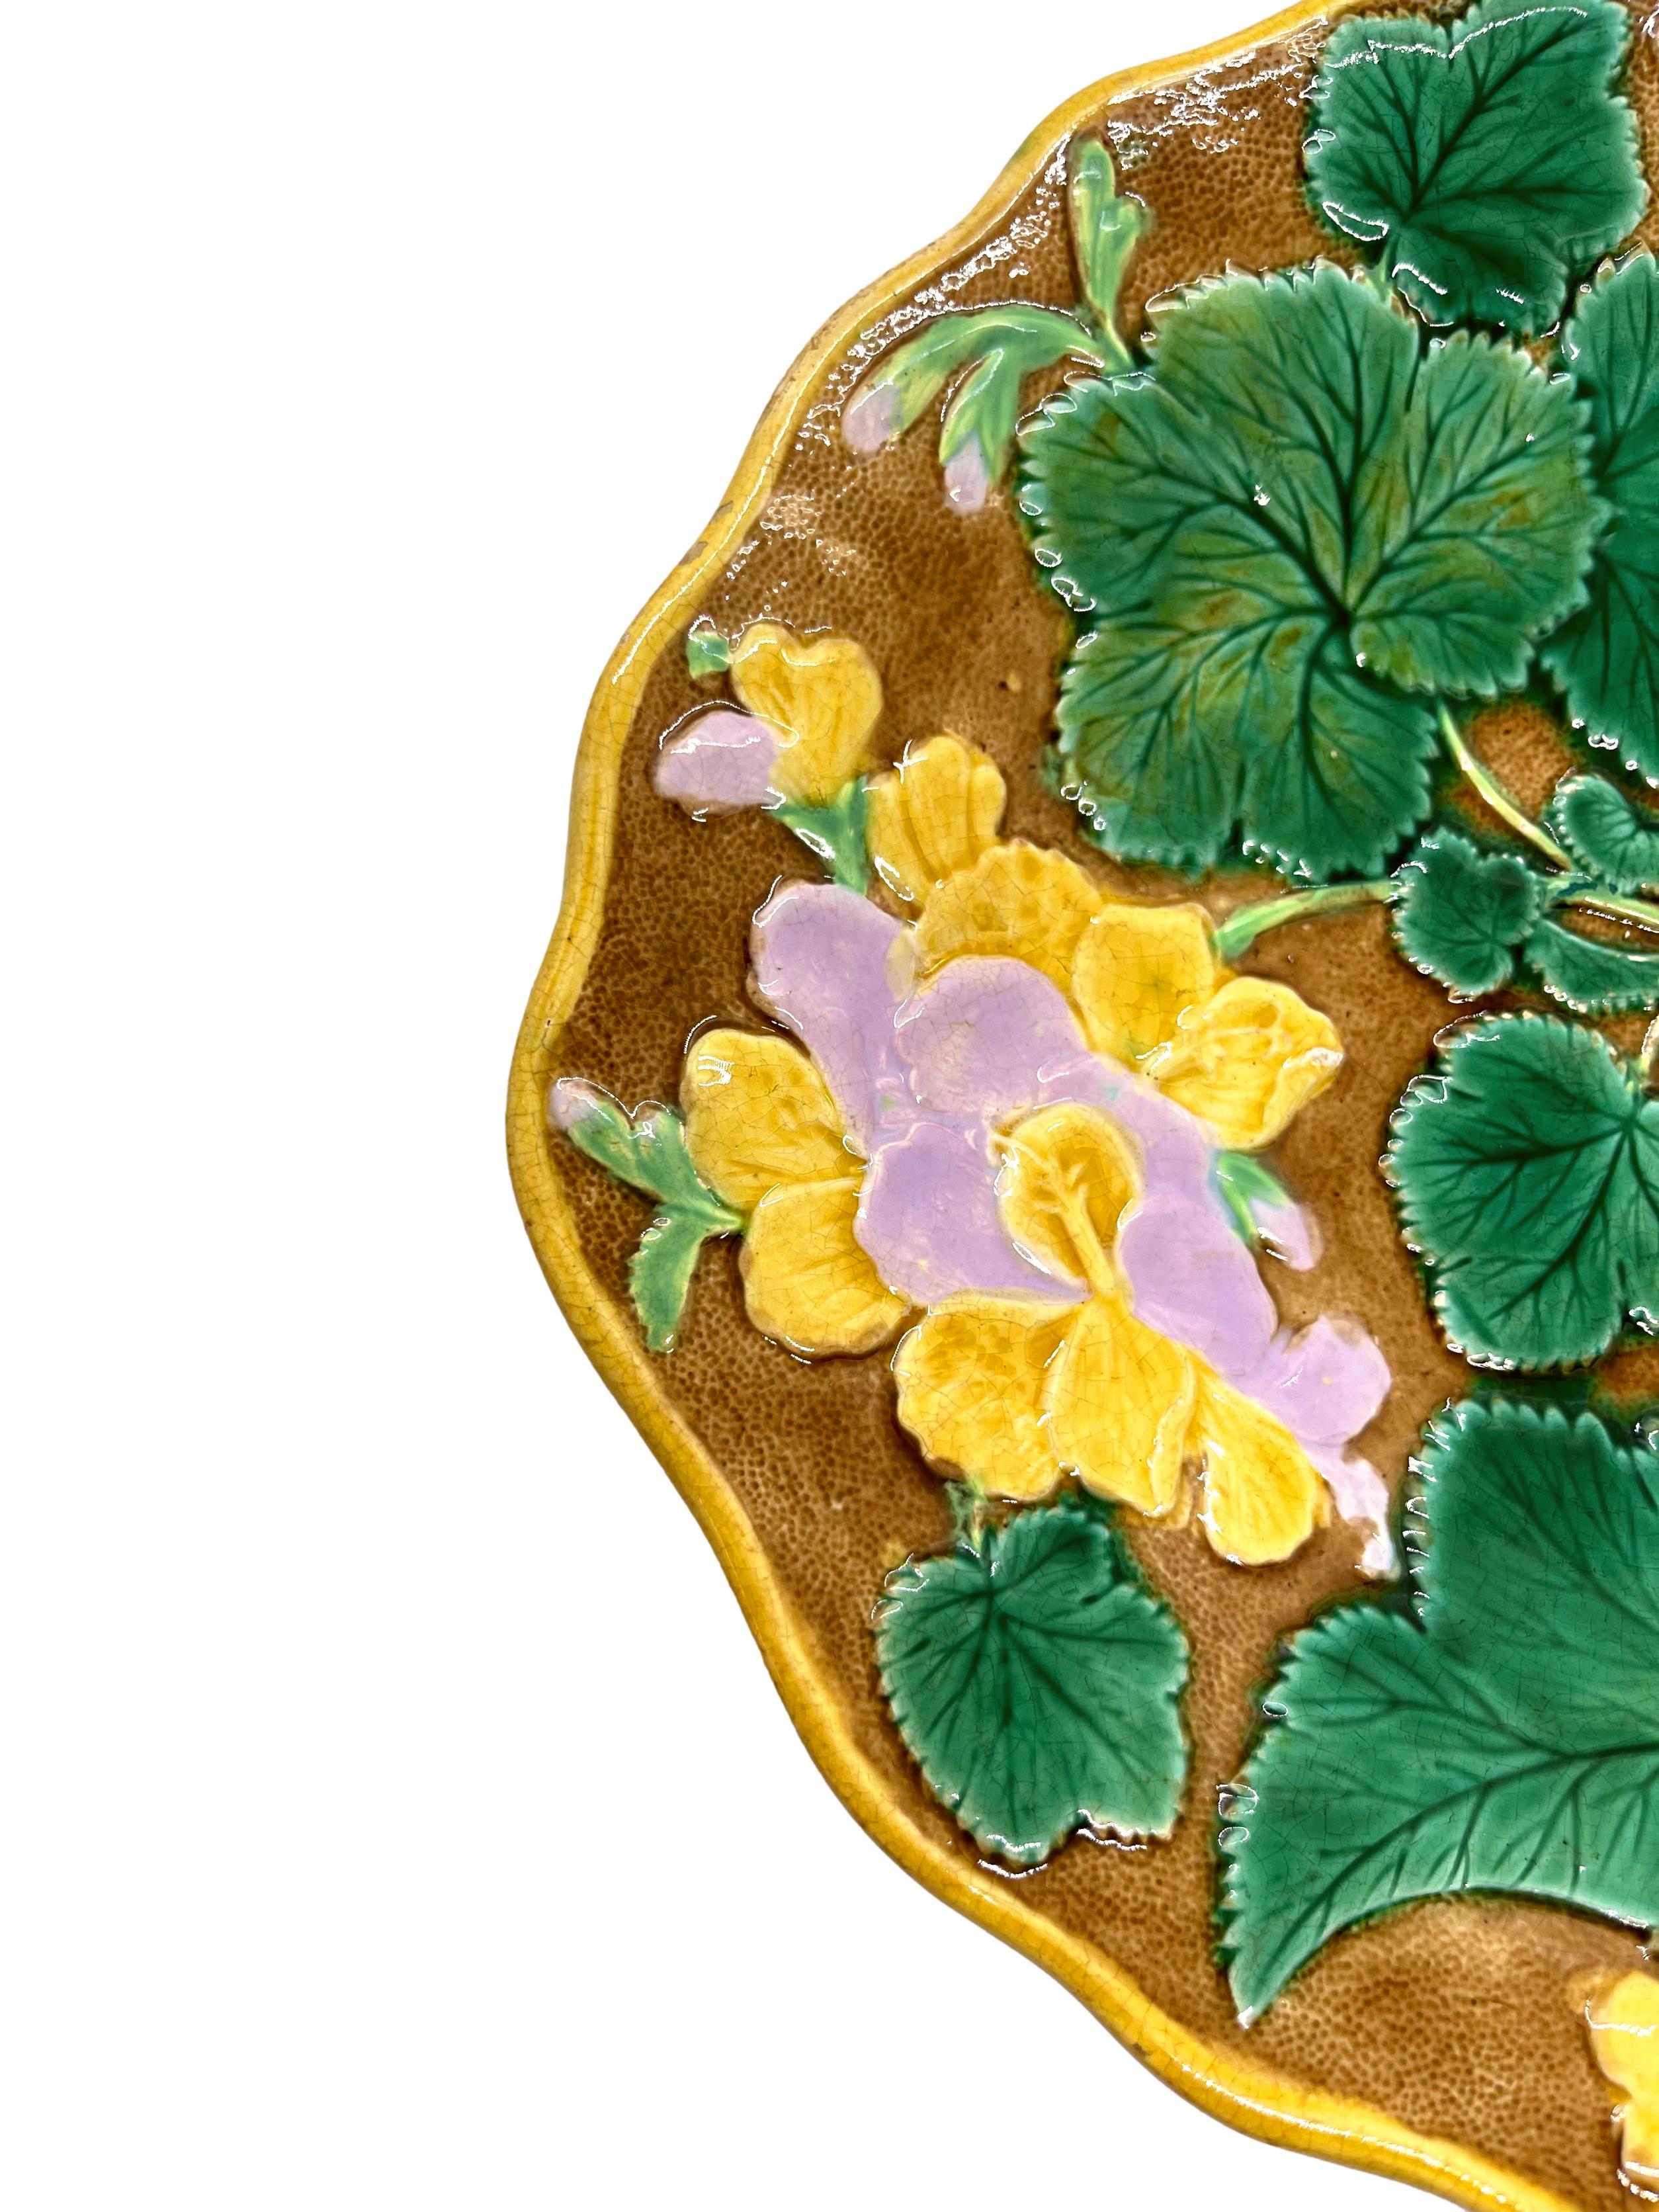 English Majolica dessert tray, the relief molded dish with geraniums and leaves, glazed in green, pink, and yellow on a rustic brown ground, ca. 1880.
For thirty years, we have been among the world's preeminent specialists in fine antique Majolica.